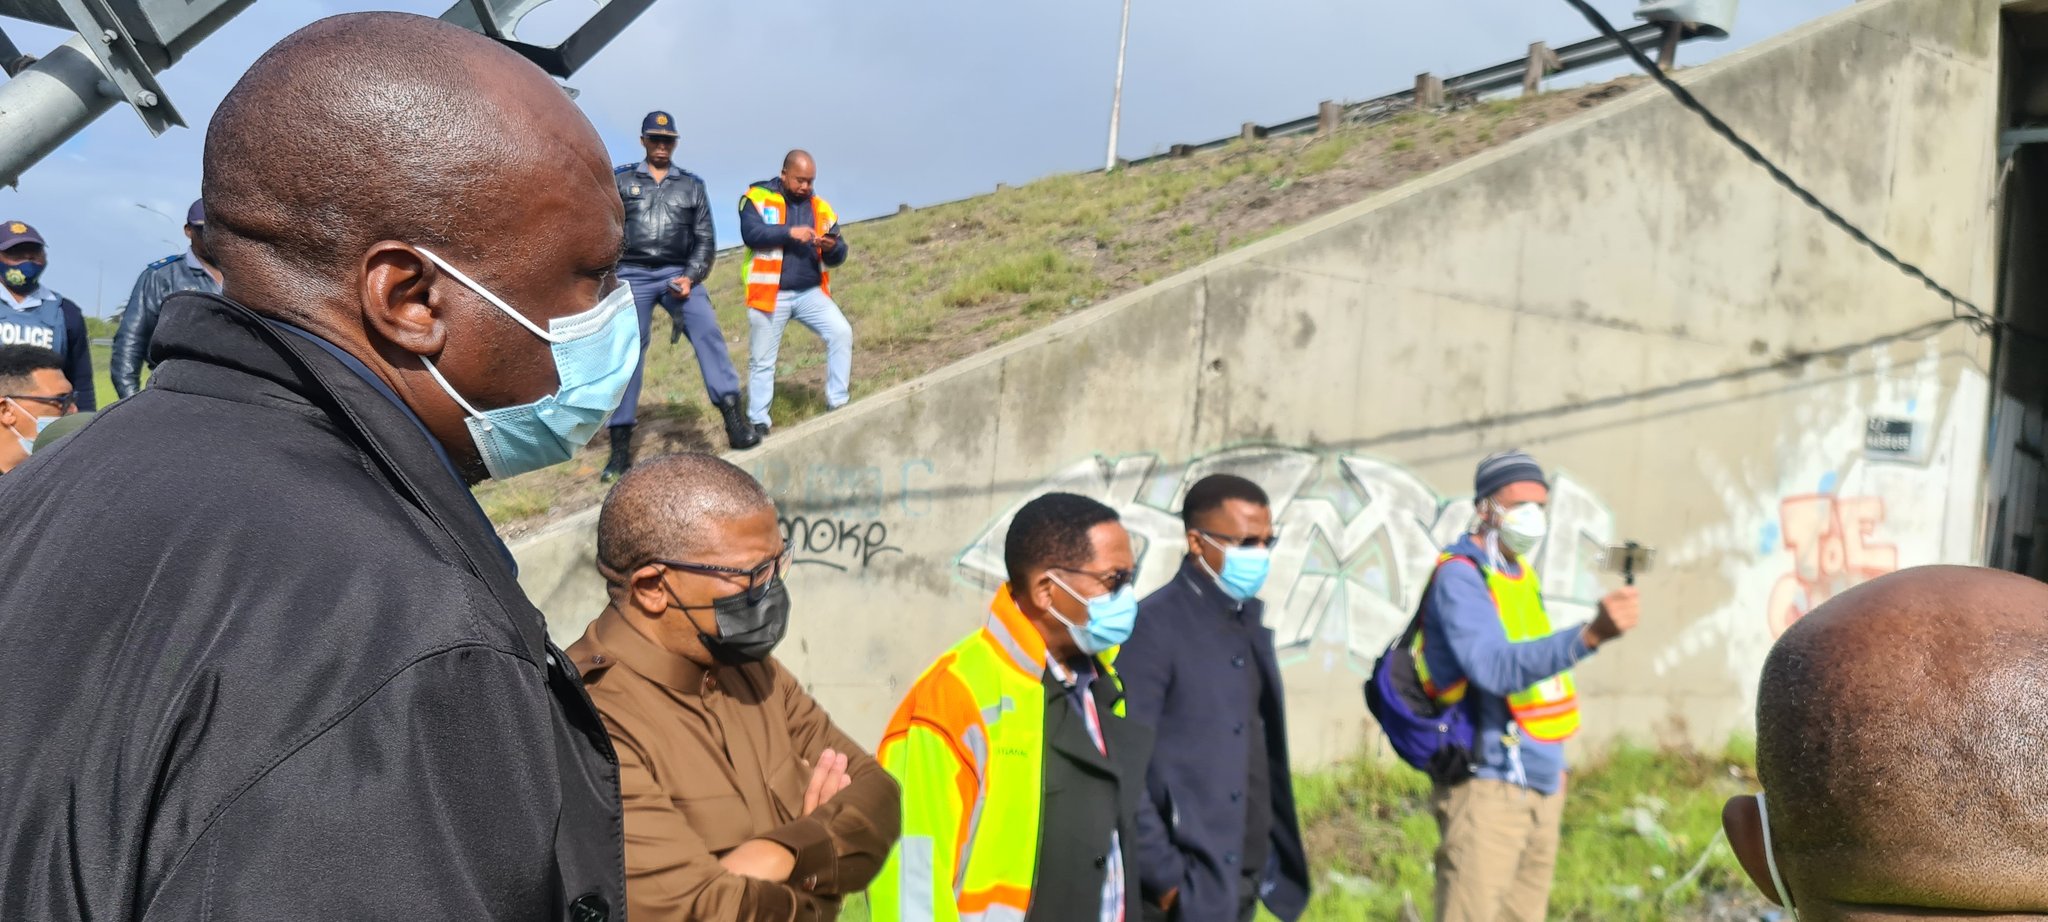 Minister of Transport Fikile Mbalula says managers at rail agencies will be held accountable for the failure of services that end up affecting commuters